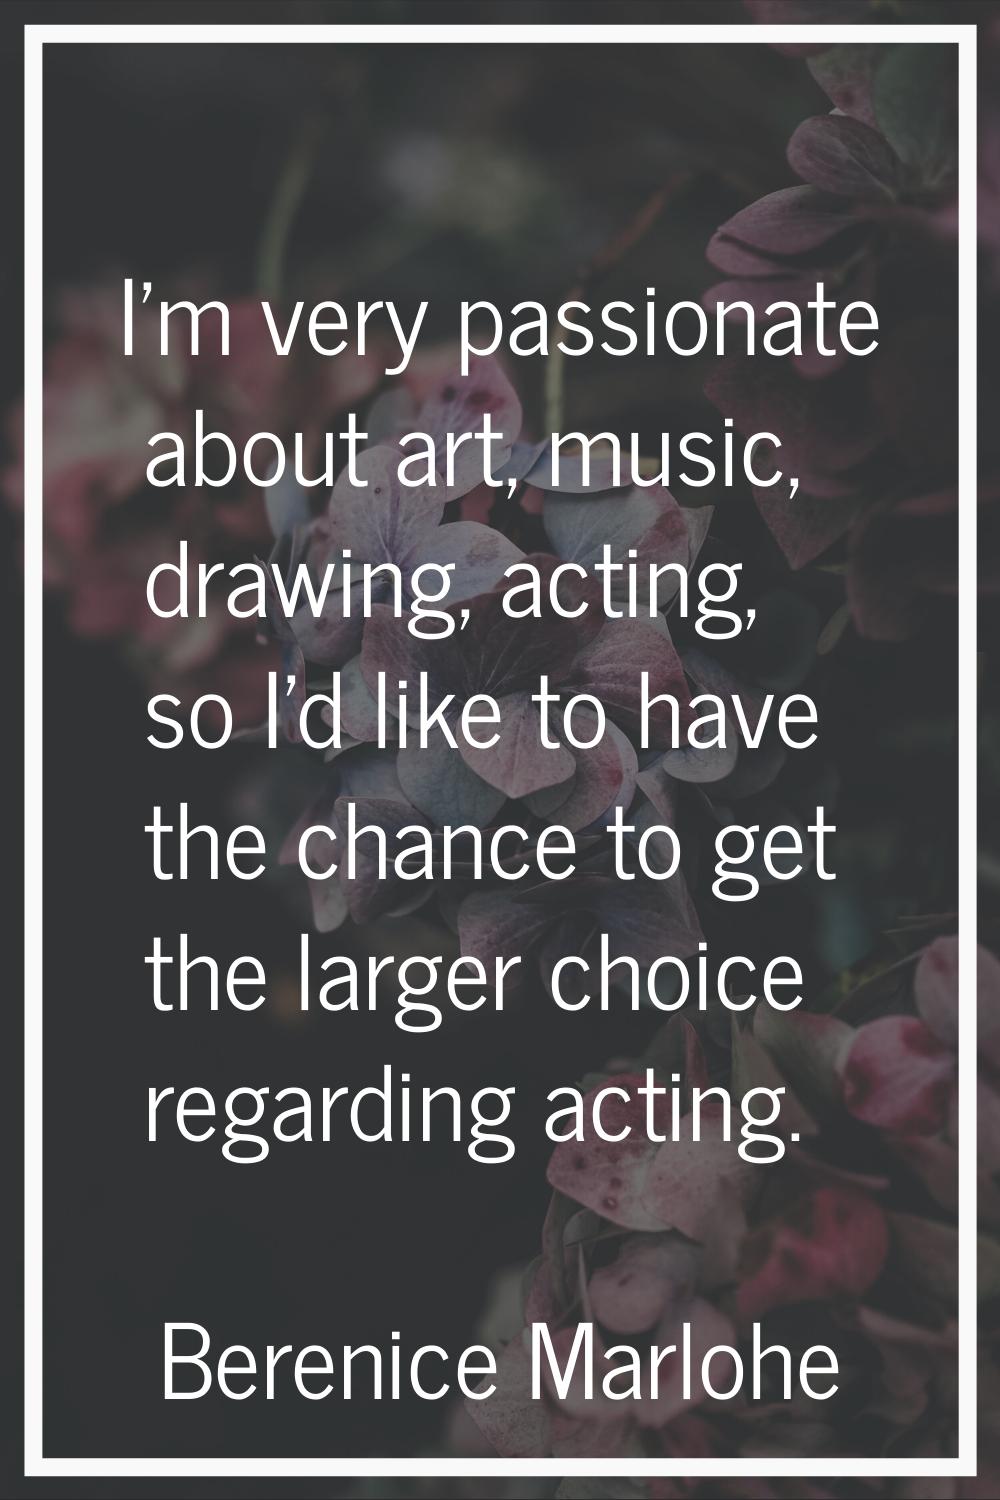 I'm very passionate about art, music, drawing, acting, so I'd like to have the chance to get the la